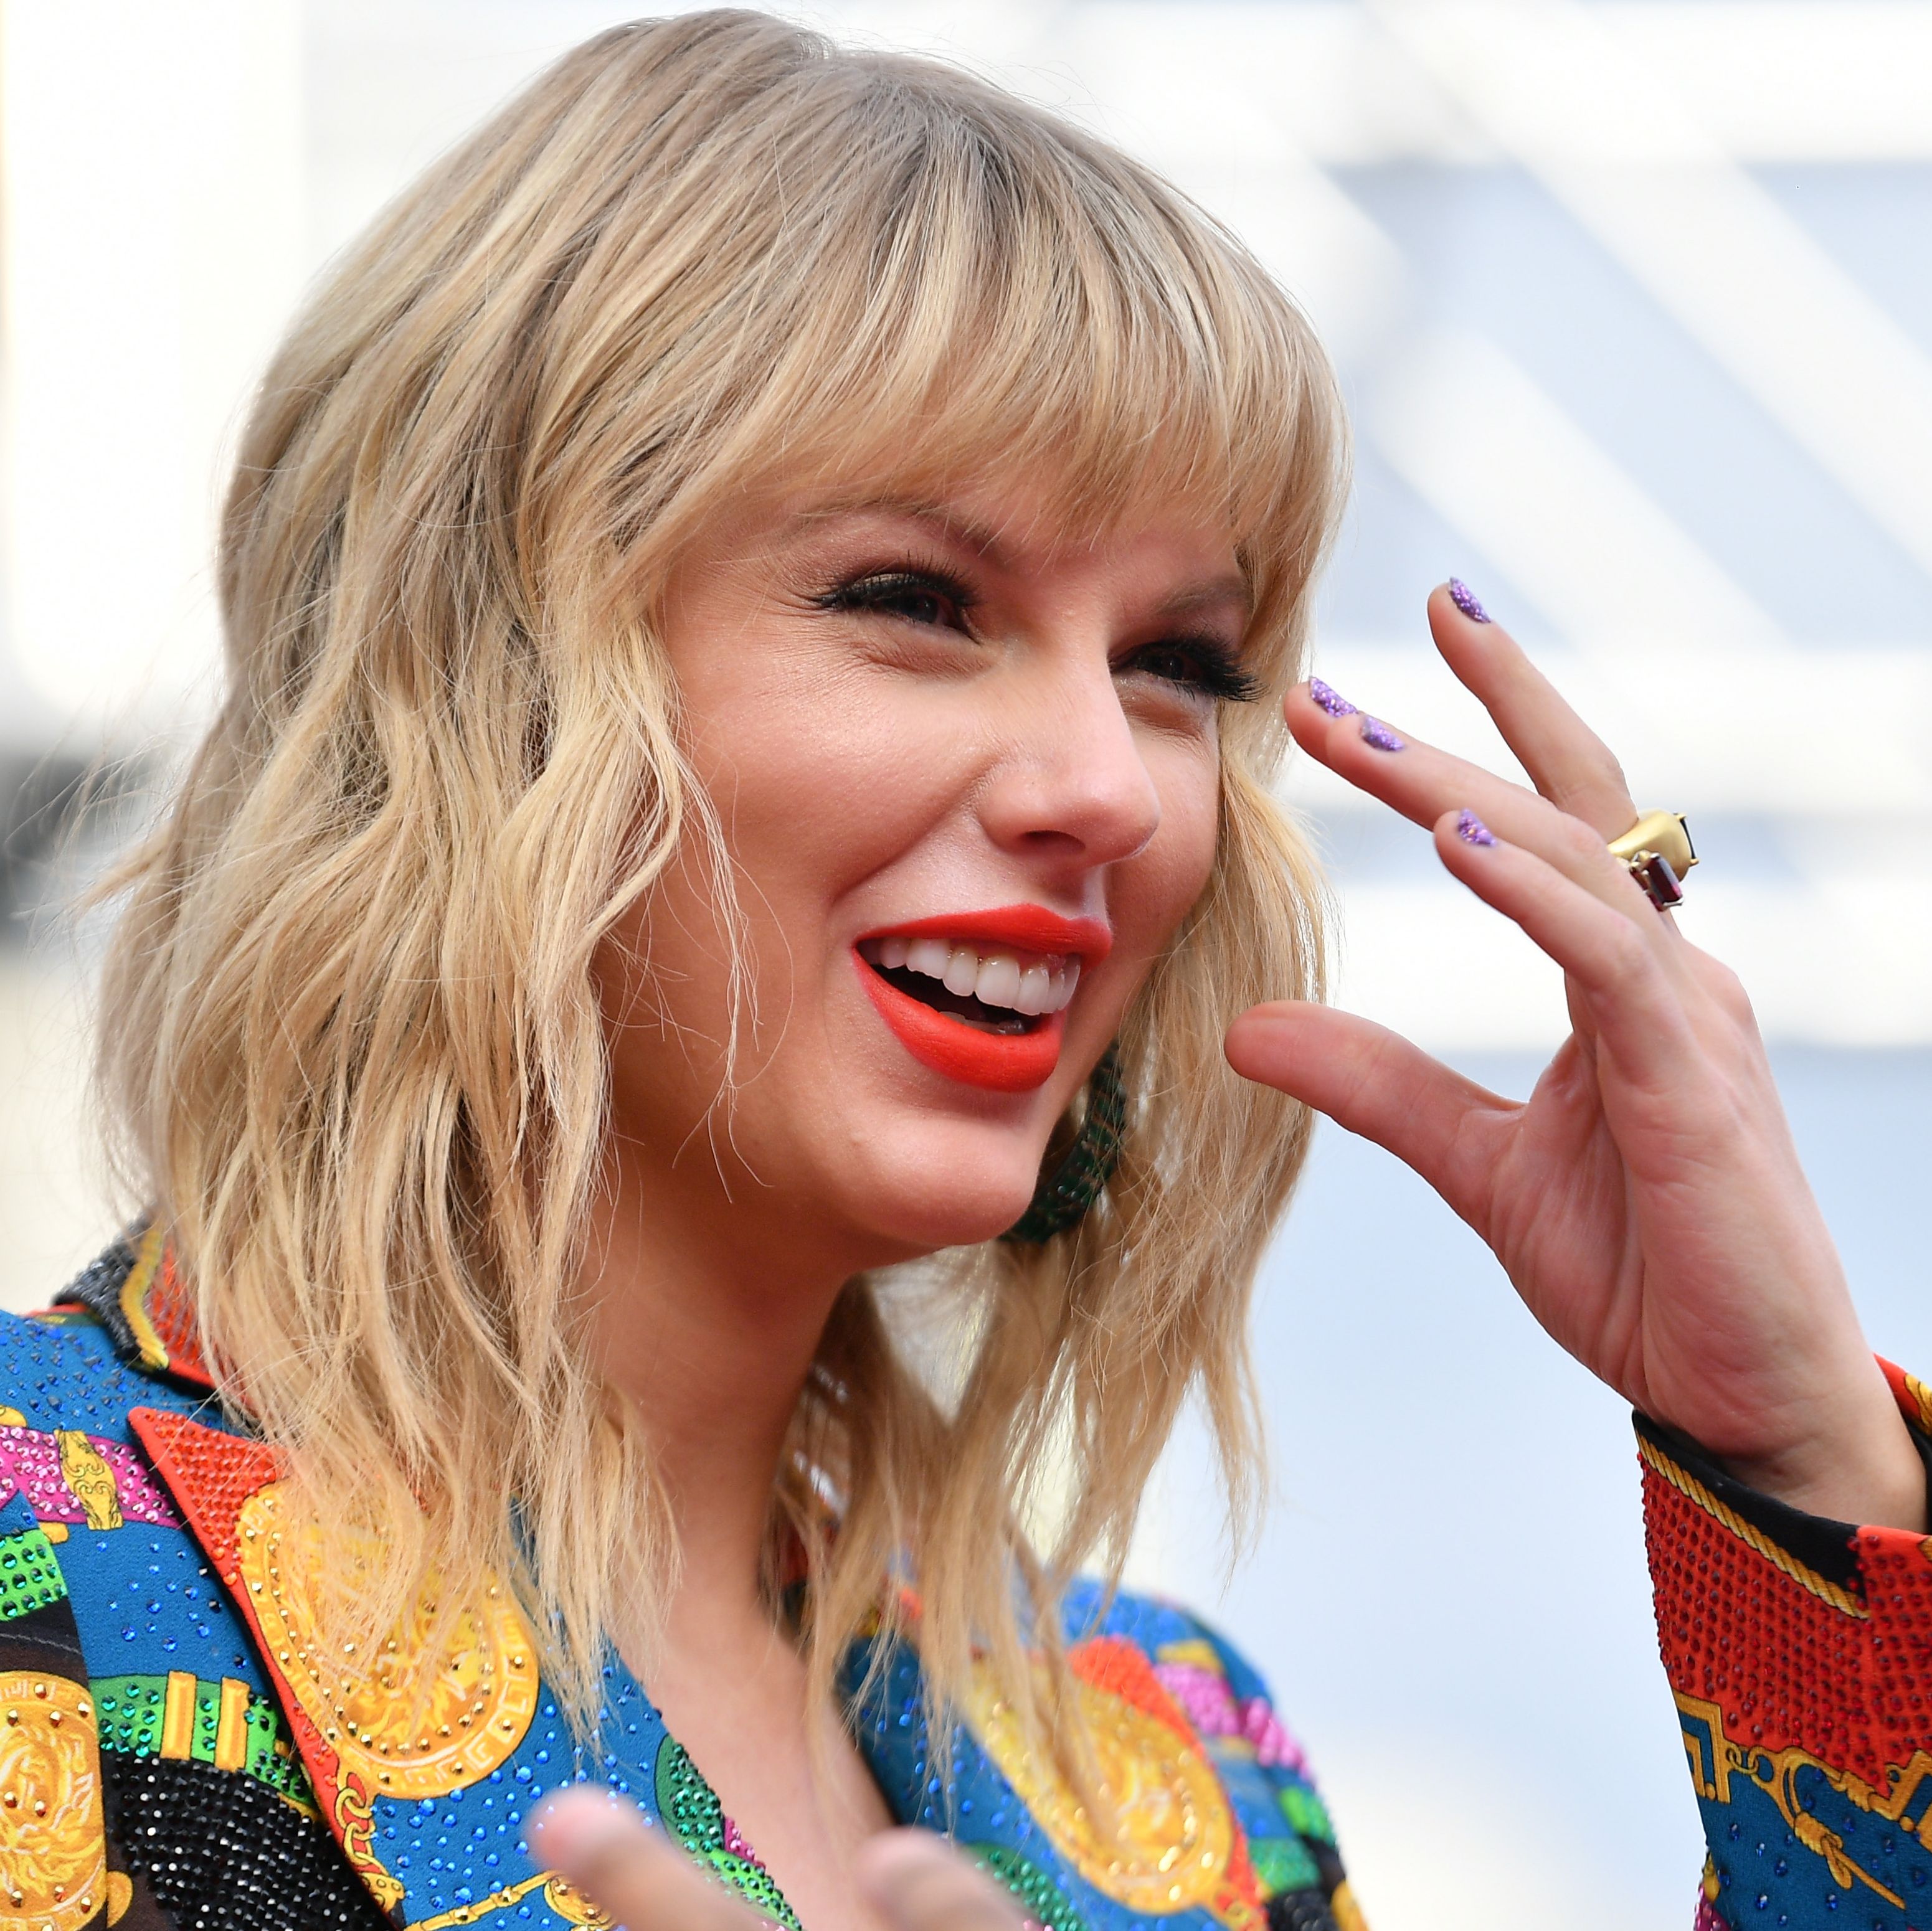 Here's How Ticketmaster Plans to Sell the Remaining 170,000 Taylor Swift 'Eras Tour' Tickets